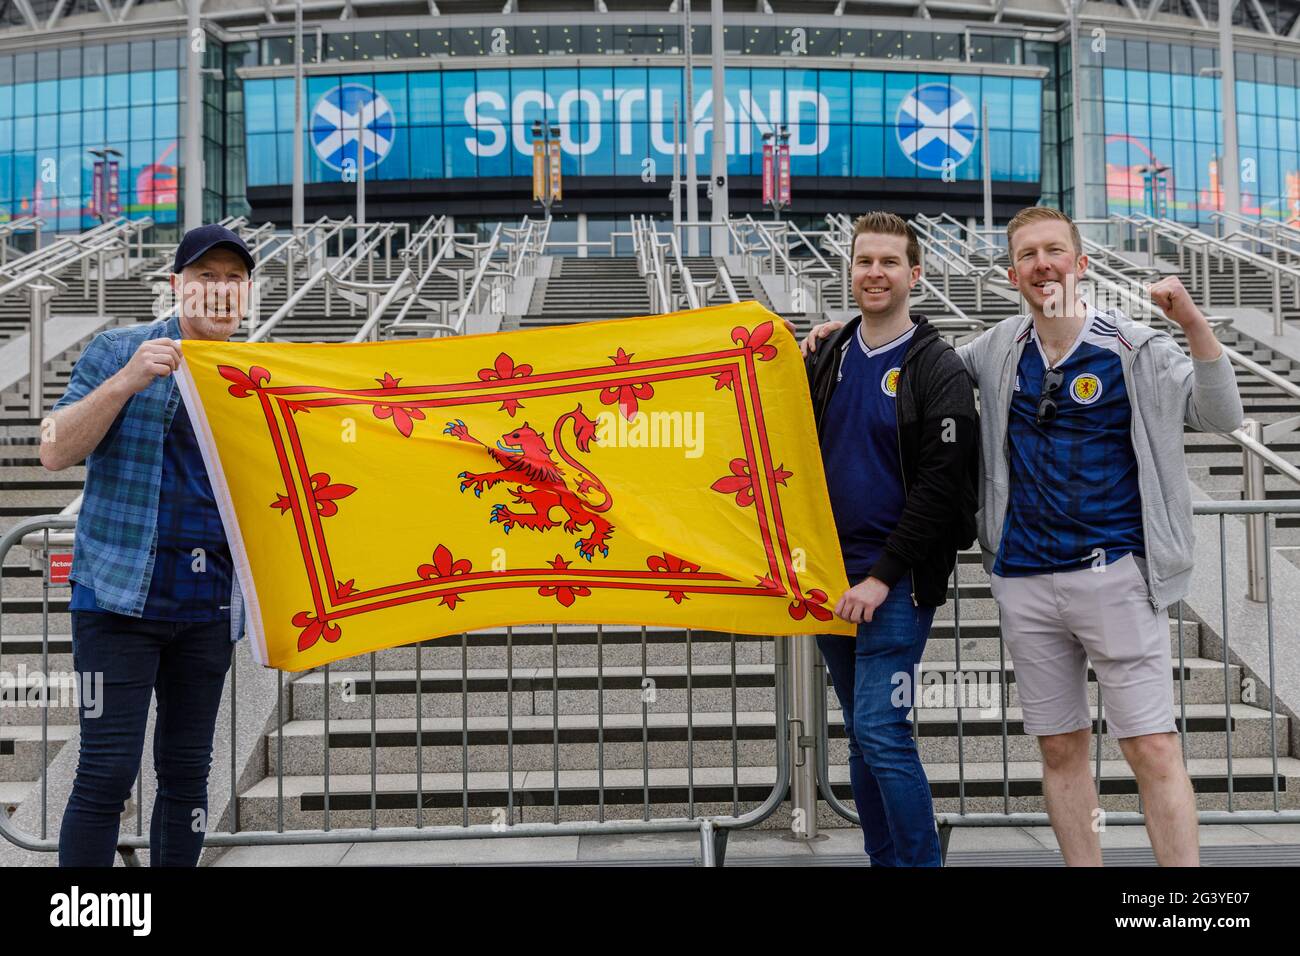 Wembley Stadium, Wembley Park, UK. 18th June, 2021. Scotland fans arrived in Wembley early this morning, despite torrential rain across London. Alan, Niall and Callum travelled from Scotland yesterday to spend the day soaking up the atmosphere in London. Scotland will face England in their 2nd Group D match of the UEFA European Football Championship at Wembley Stadium this evening with an 8pm kick off. Credit: amanda rose/Alamy Live News Stock Photo